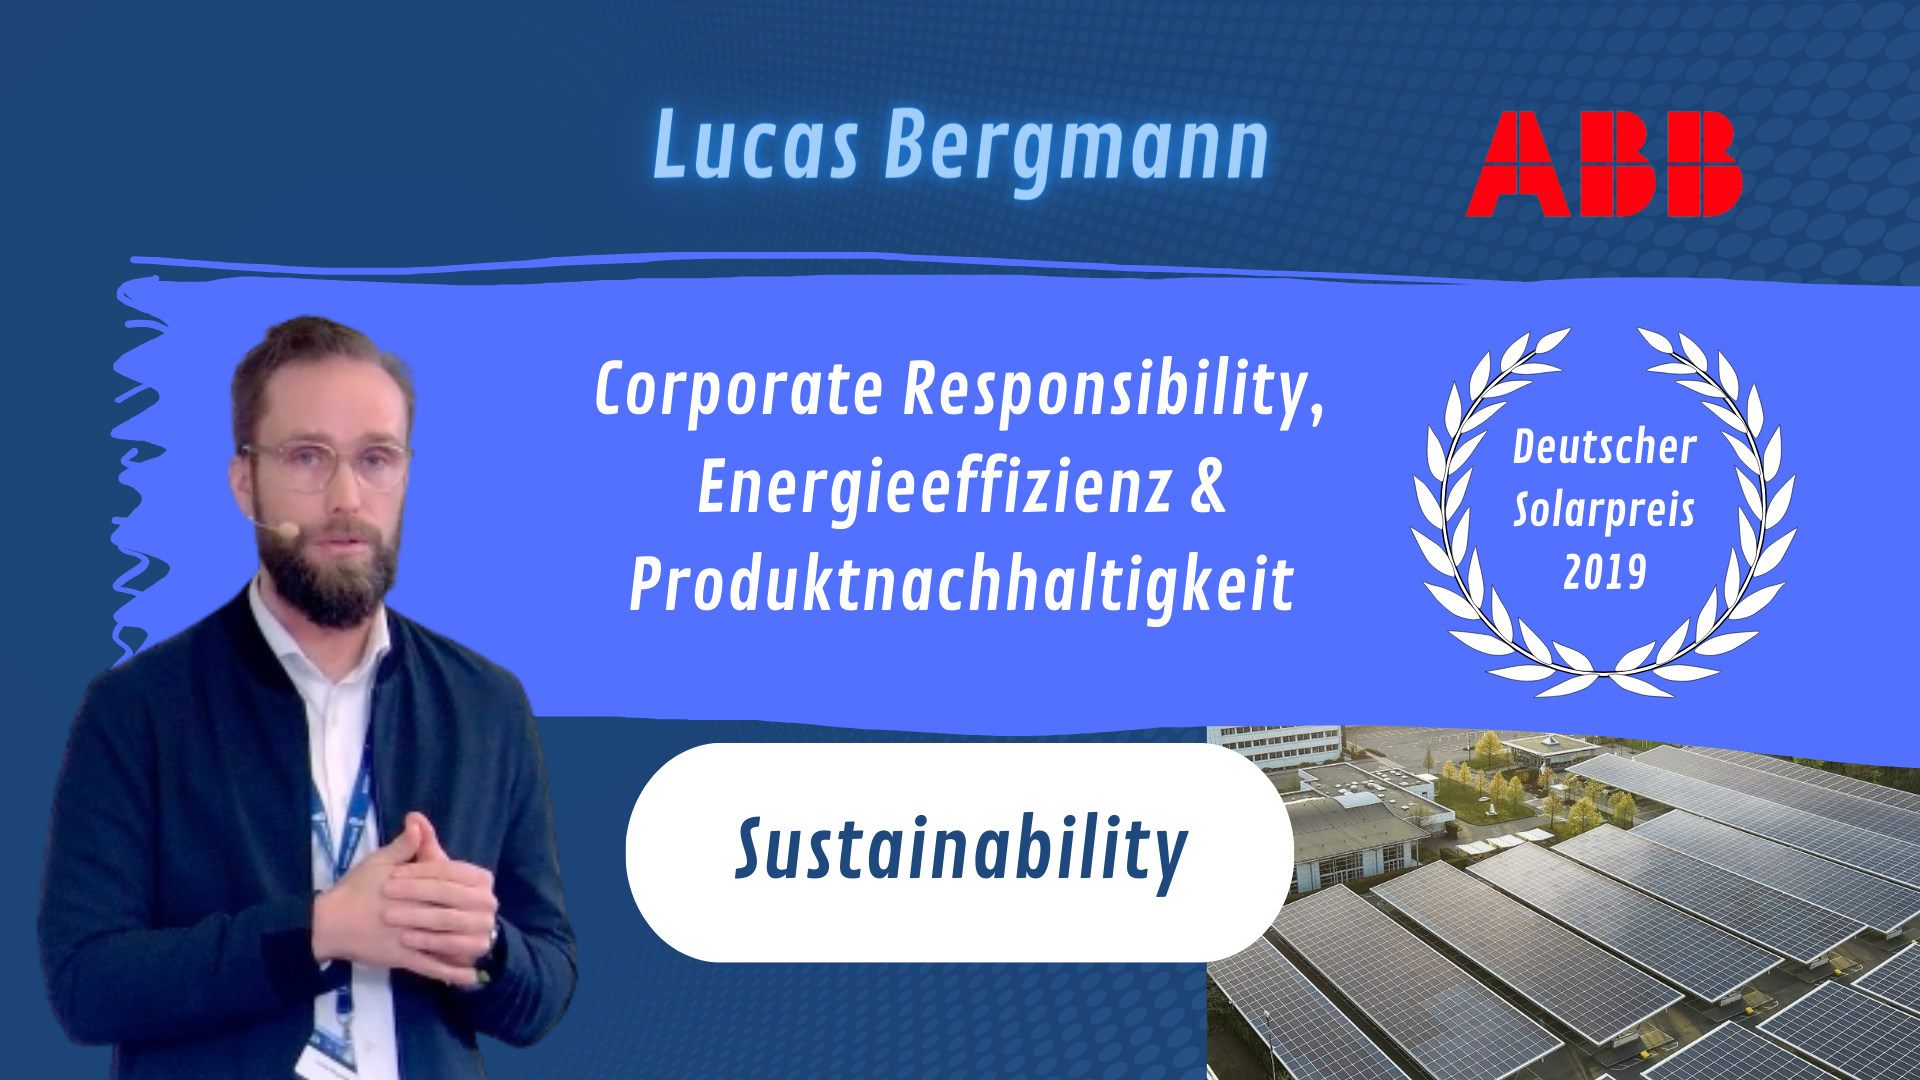 GREEN - Sustainability with Lucas Bergmann